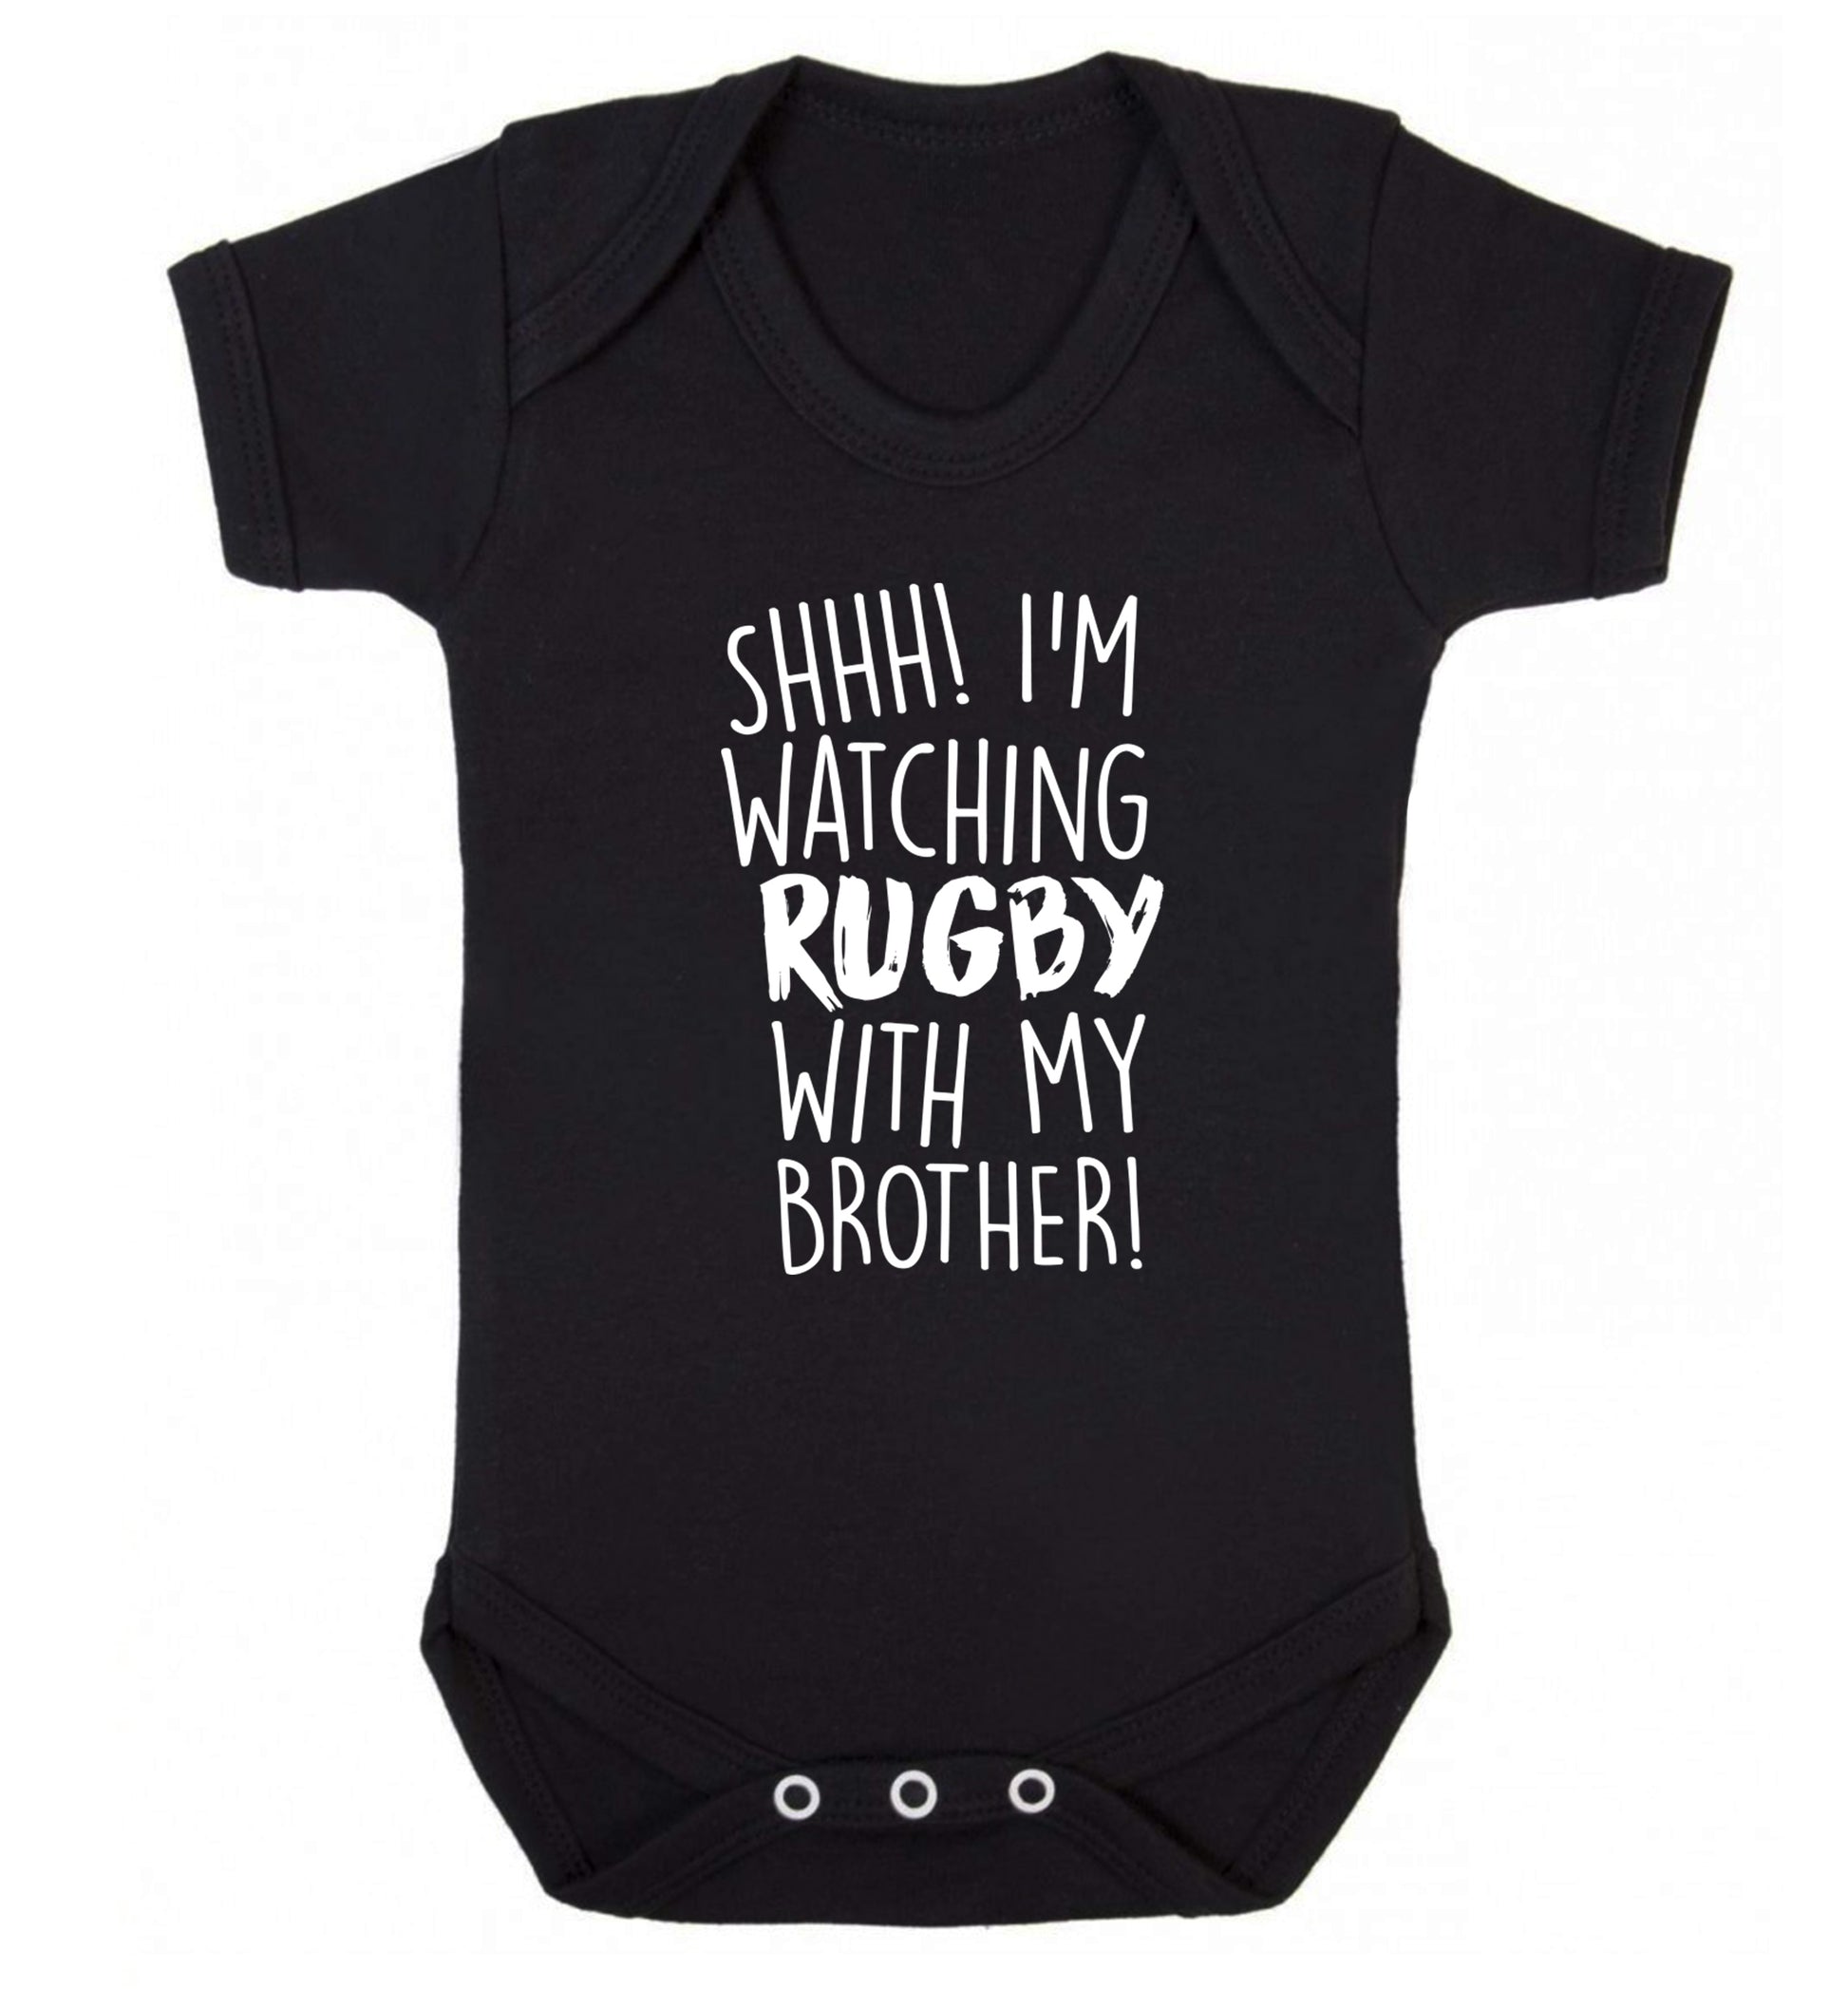 Shh... I'm watching rugby with my brother Baby Vest black 18-24 months